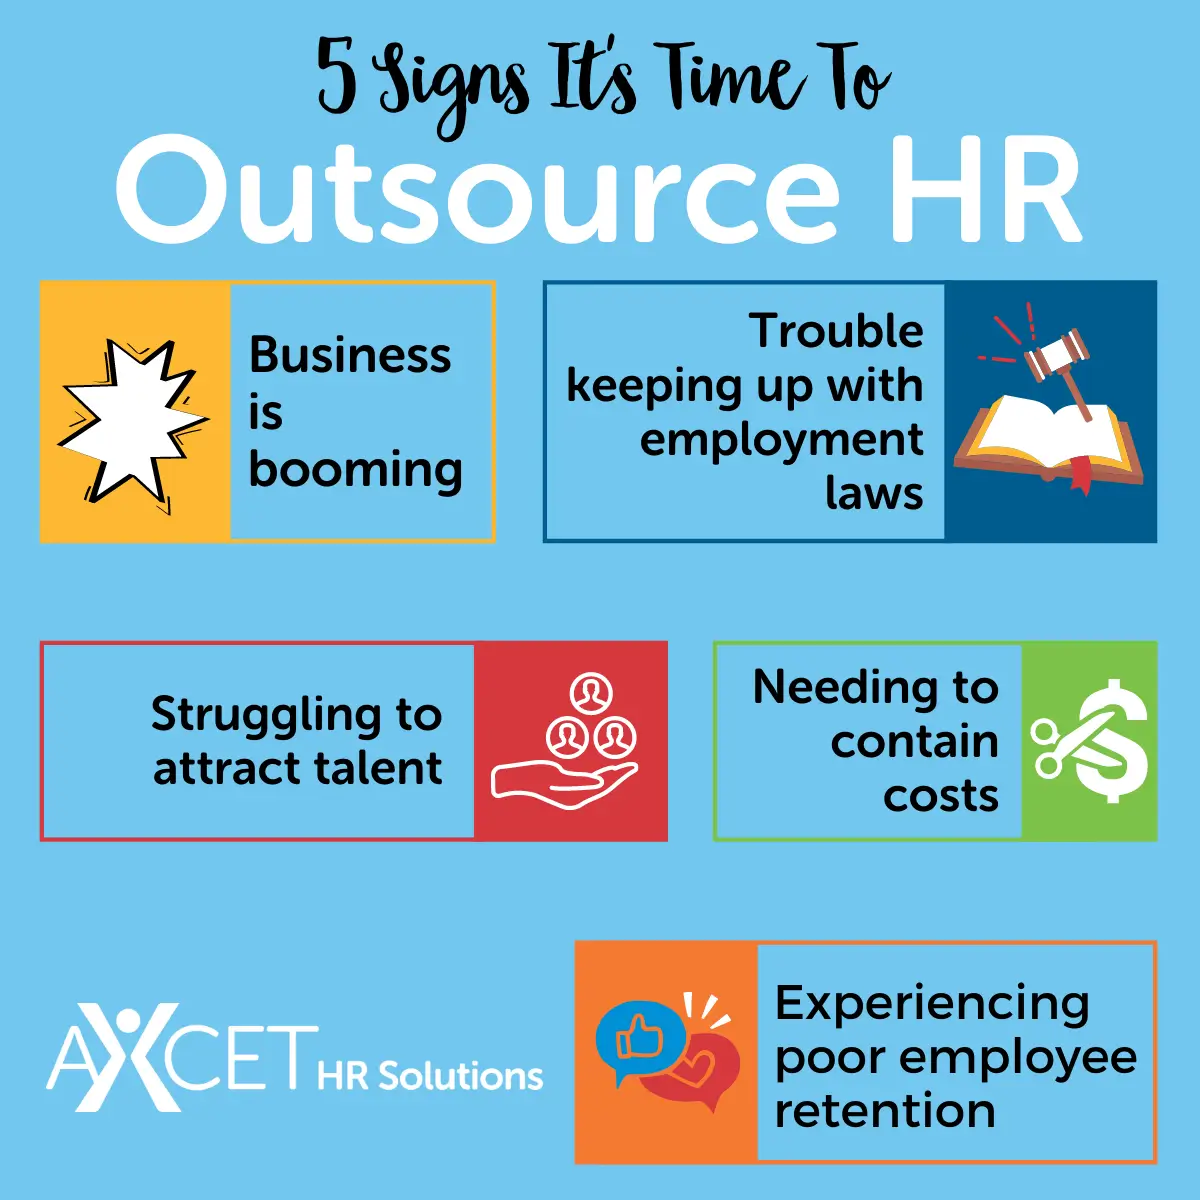 5-Signs-It_s-Time-To-Outsource-HR-Infographic-1200x1200-v2-_1_ (1)